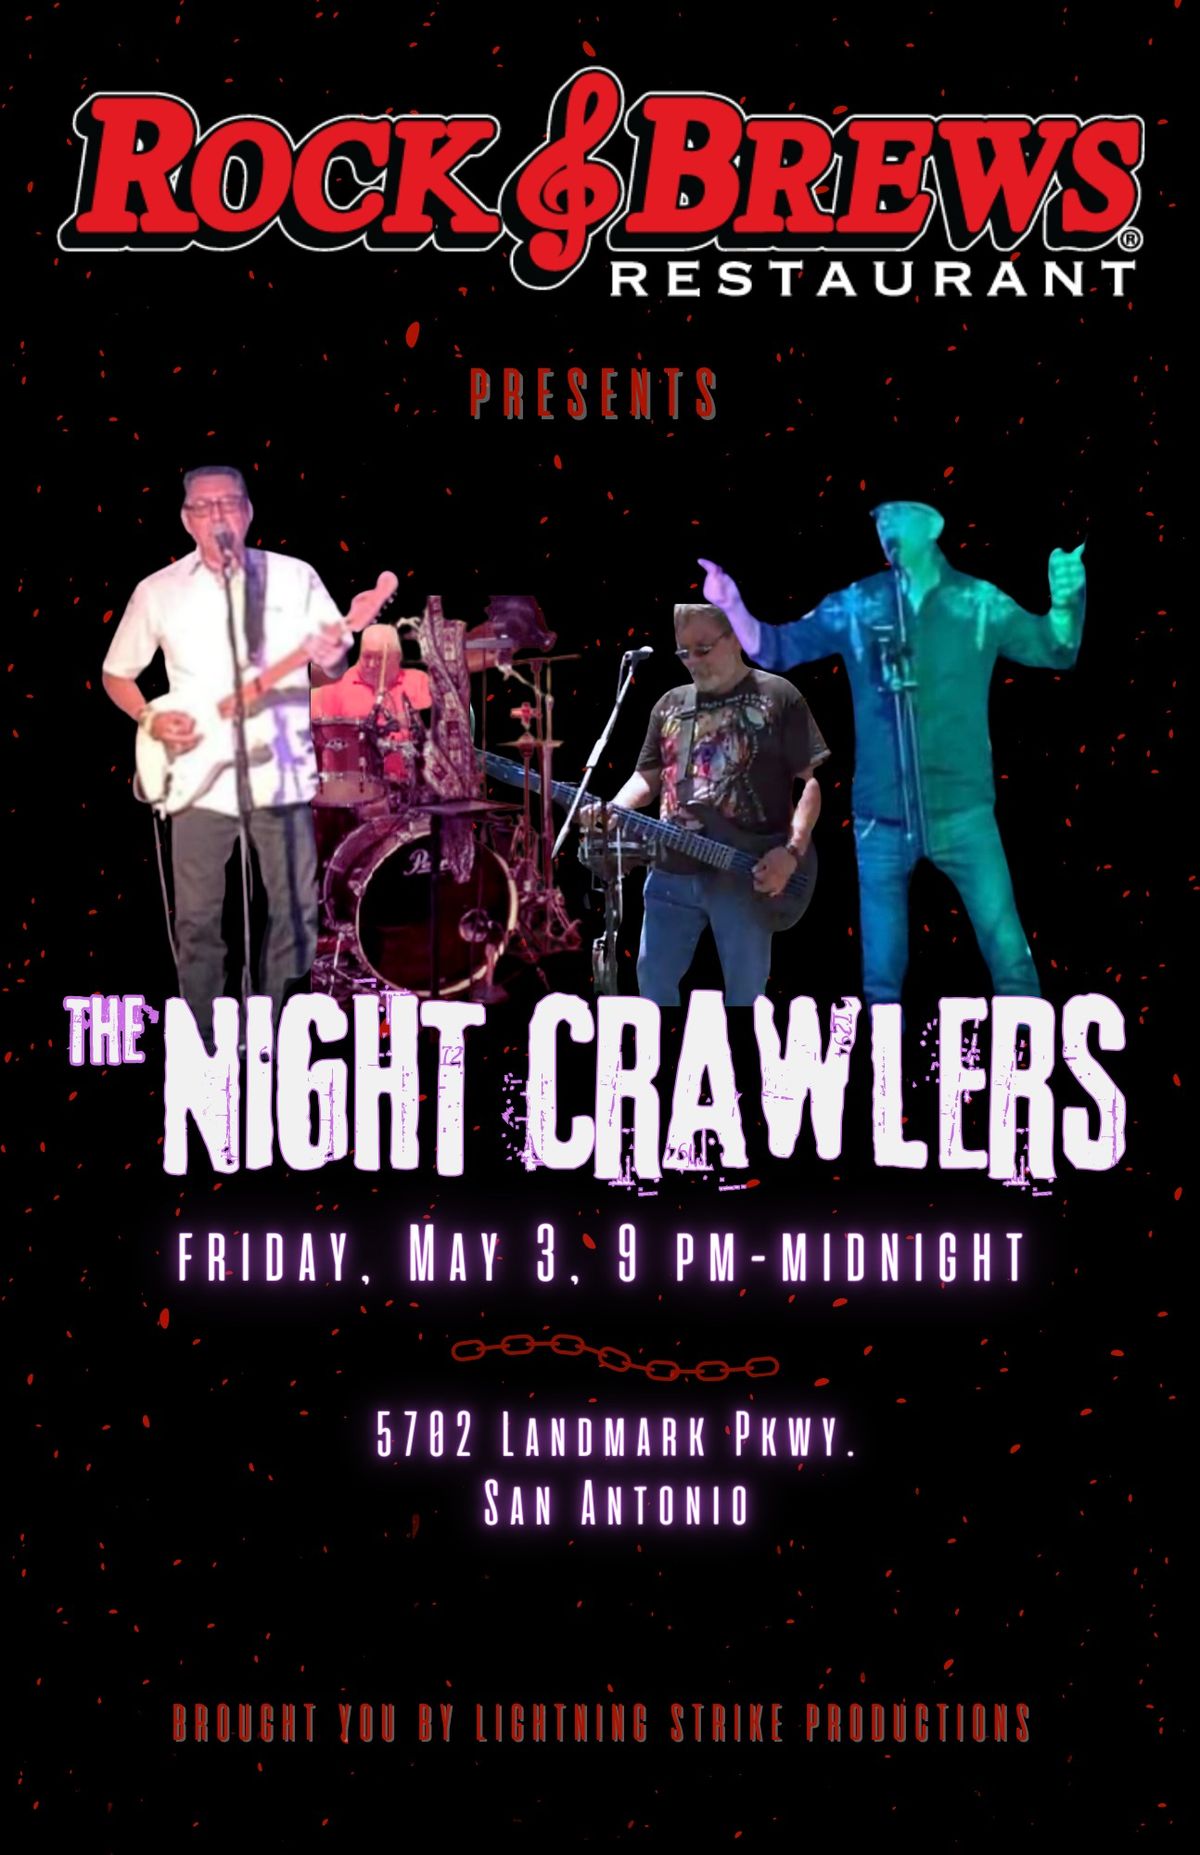 Live Music featuring Night Crawlers